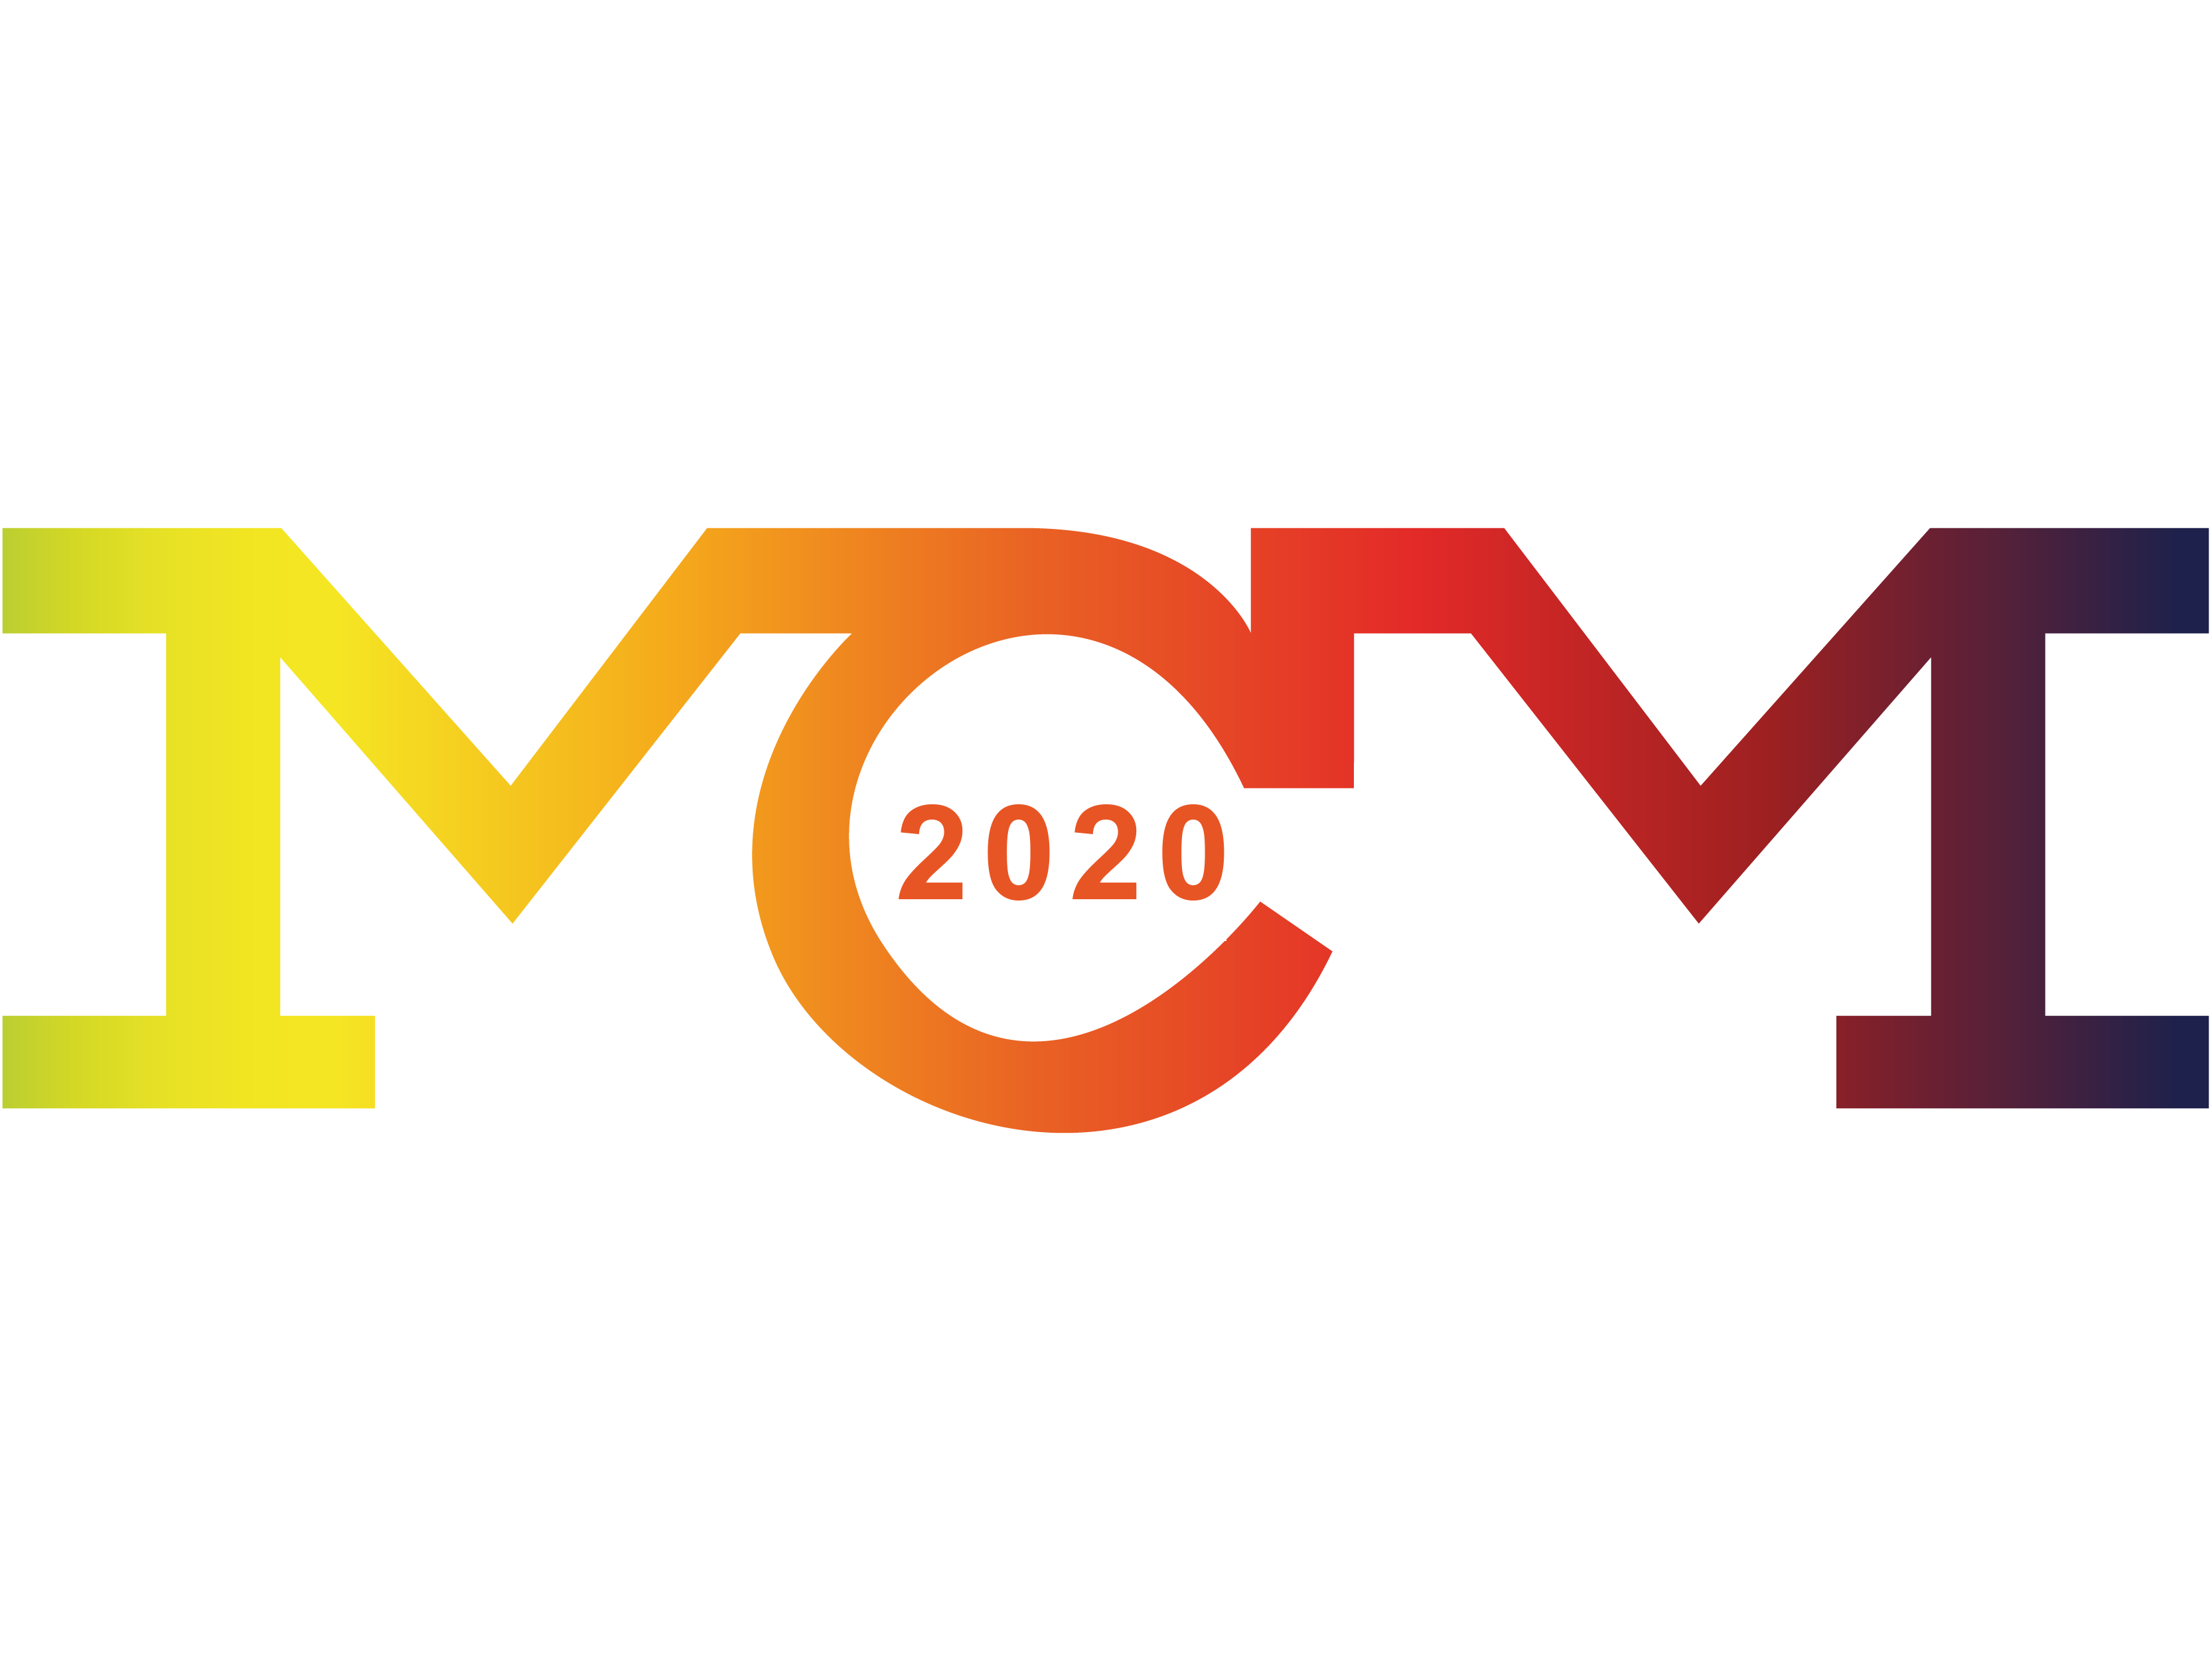 4th World Congress on Mechanical, Chemical, and Material Engineering, Prague, Czech Republic, August 16 - 18, 2020